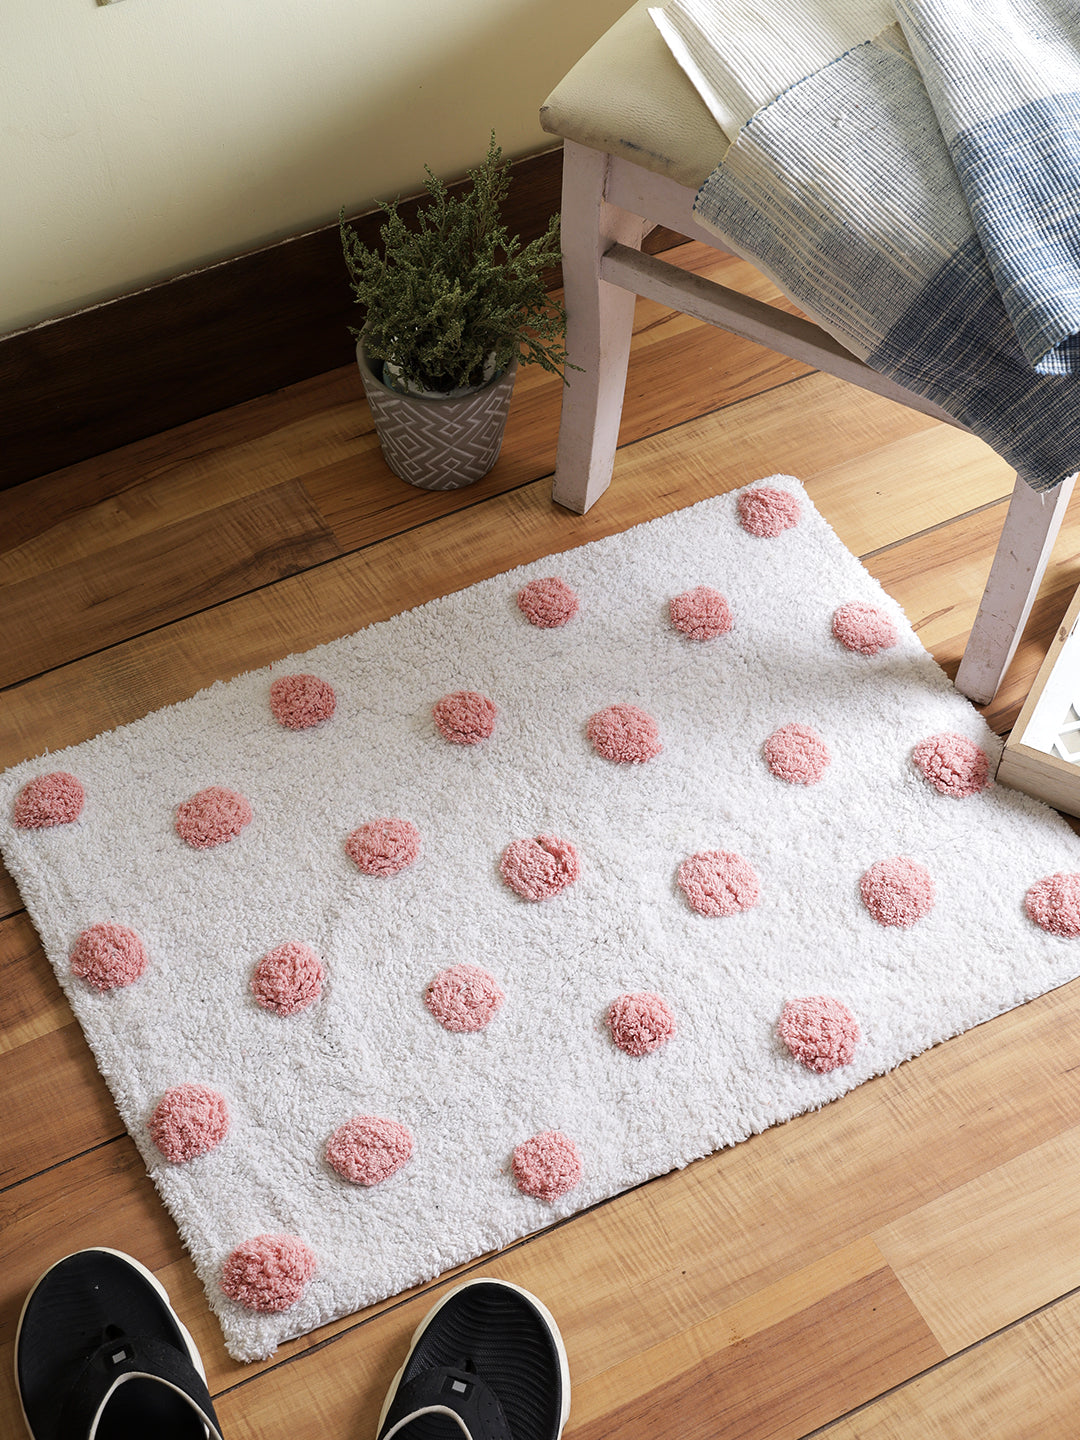 Pink and white Tufted Cotton Bath Mat